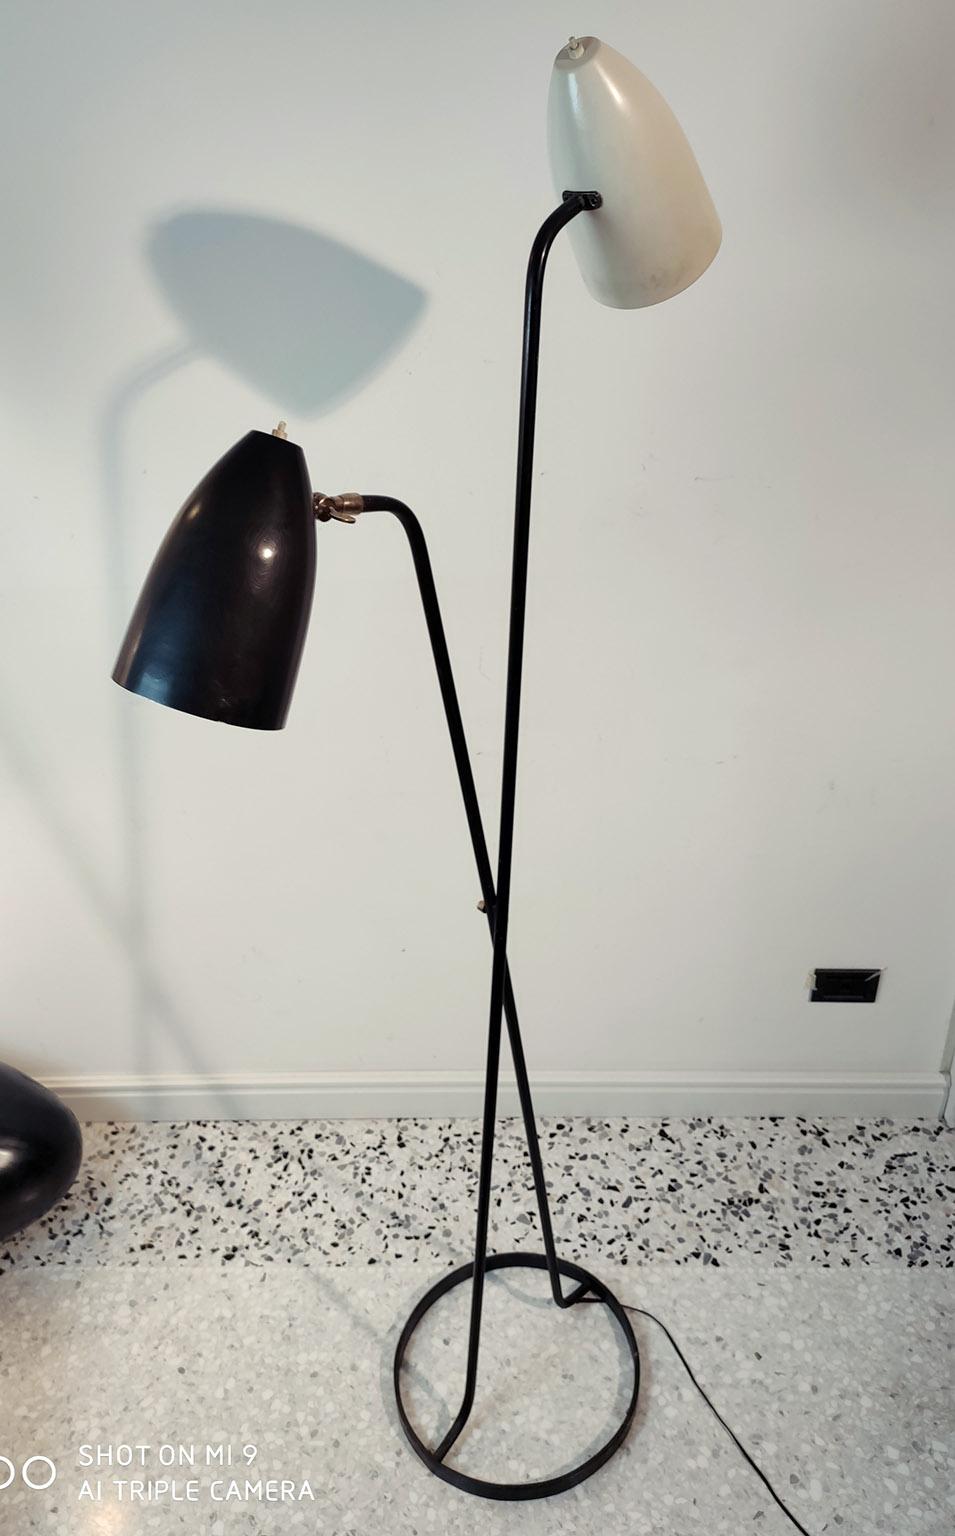 Mid-20th Century Mid-Century Modern Large Black and White Floorlamp by Stilnovo, Milano, 1950s For Sale